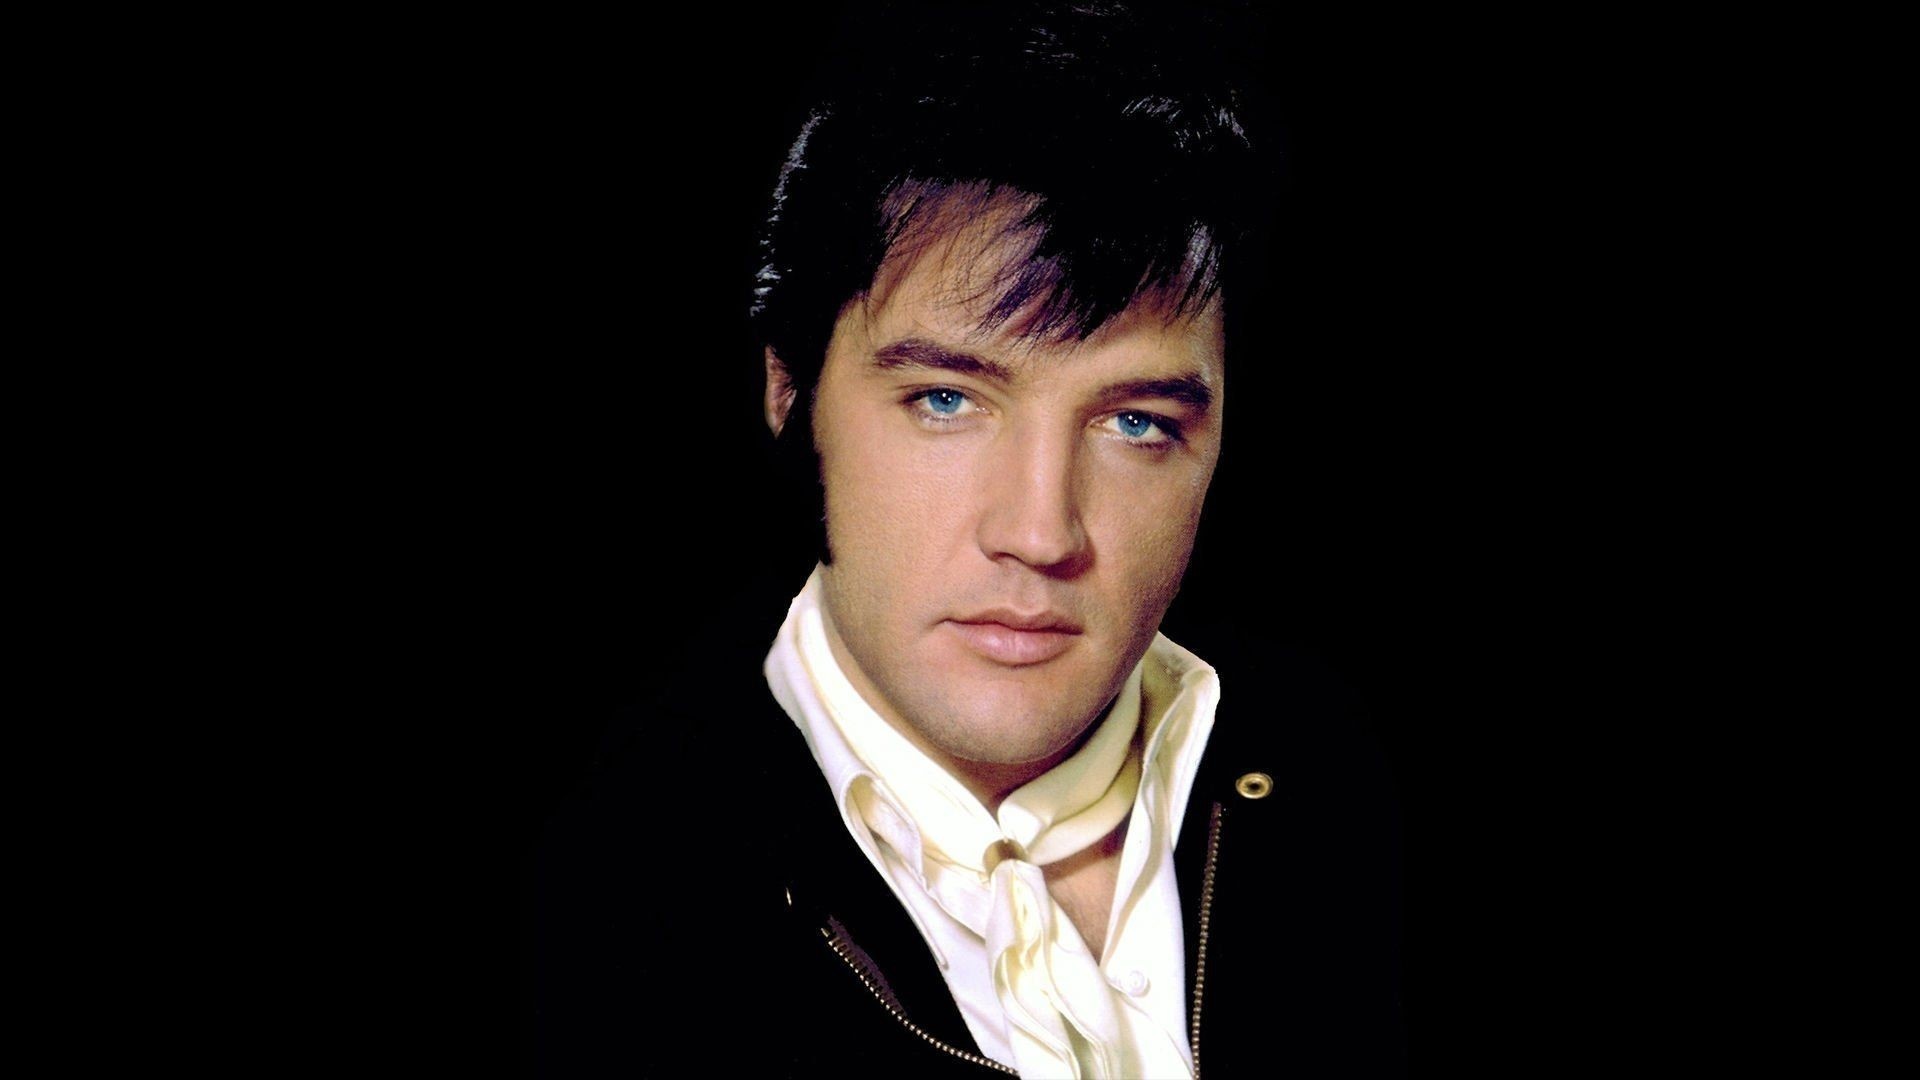 Elvis Presley: His discography is studded with classics including ‘All Shook Up’, ‘Can’t Help Falling in Love’, ‘Jailhouse Rock’. 1920x1080 Full HD Background.